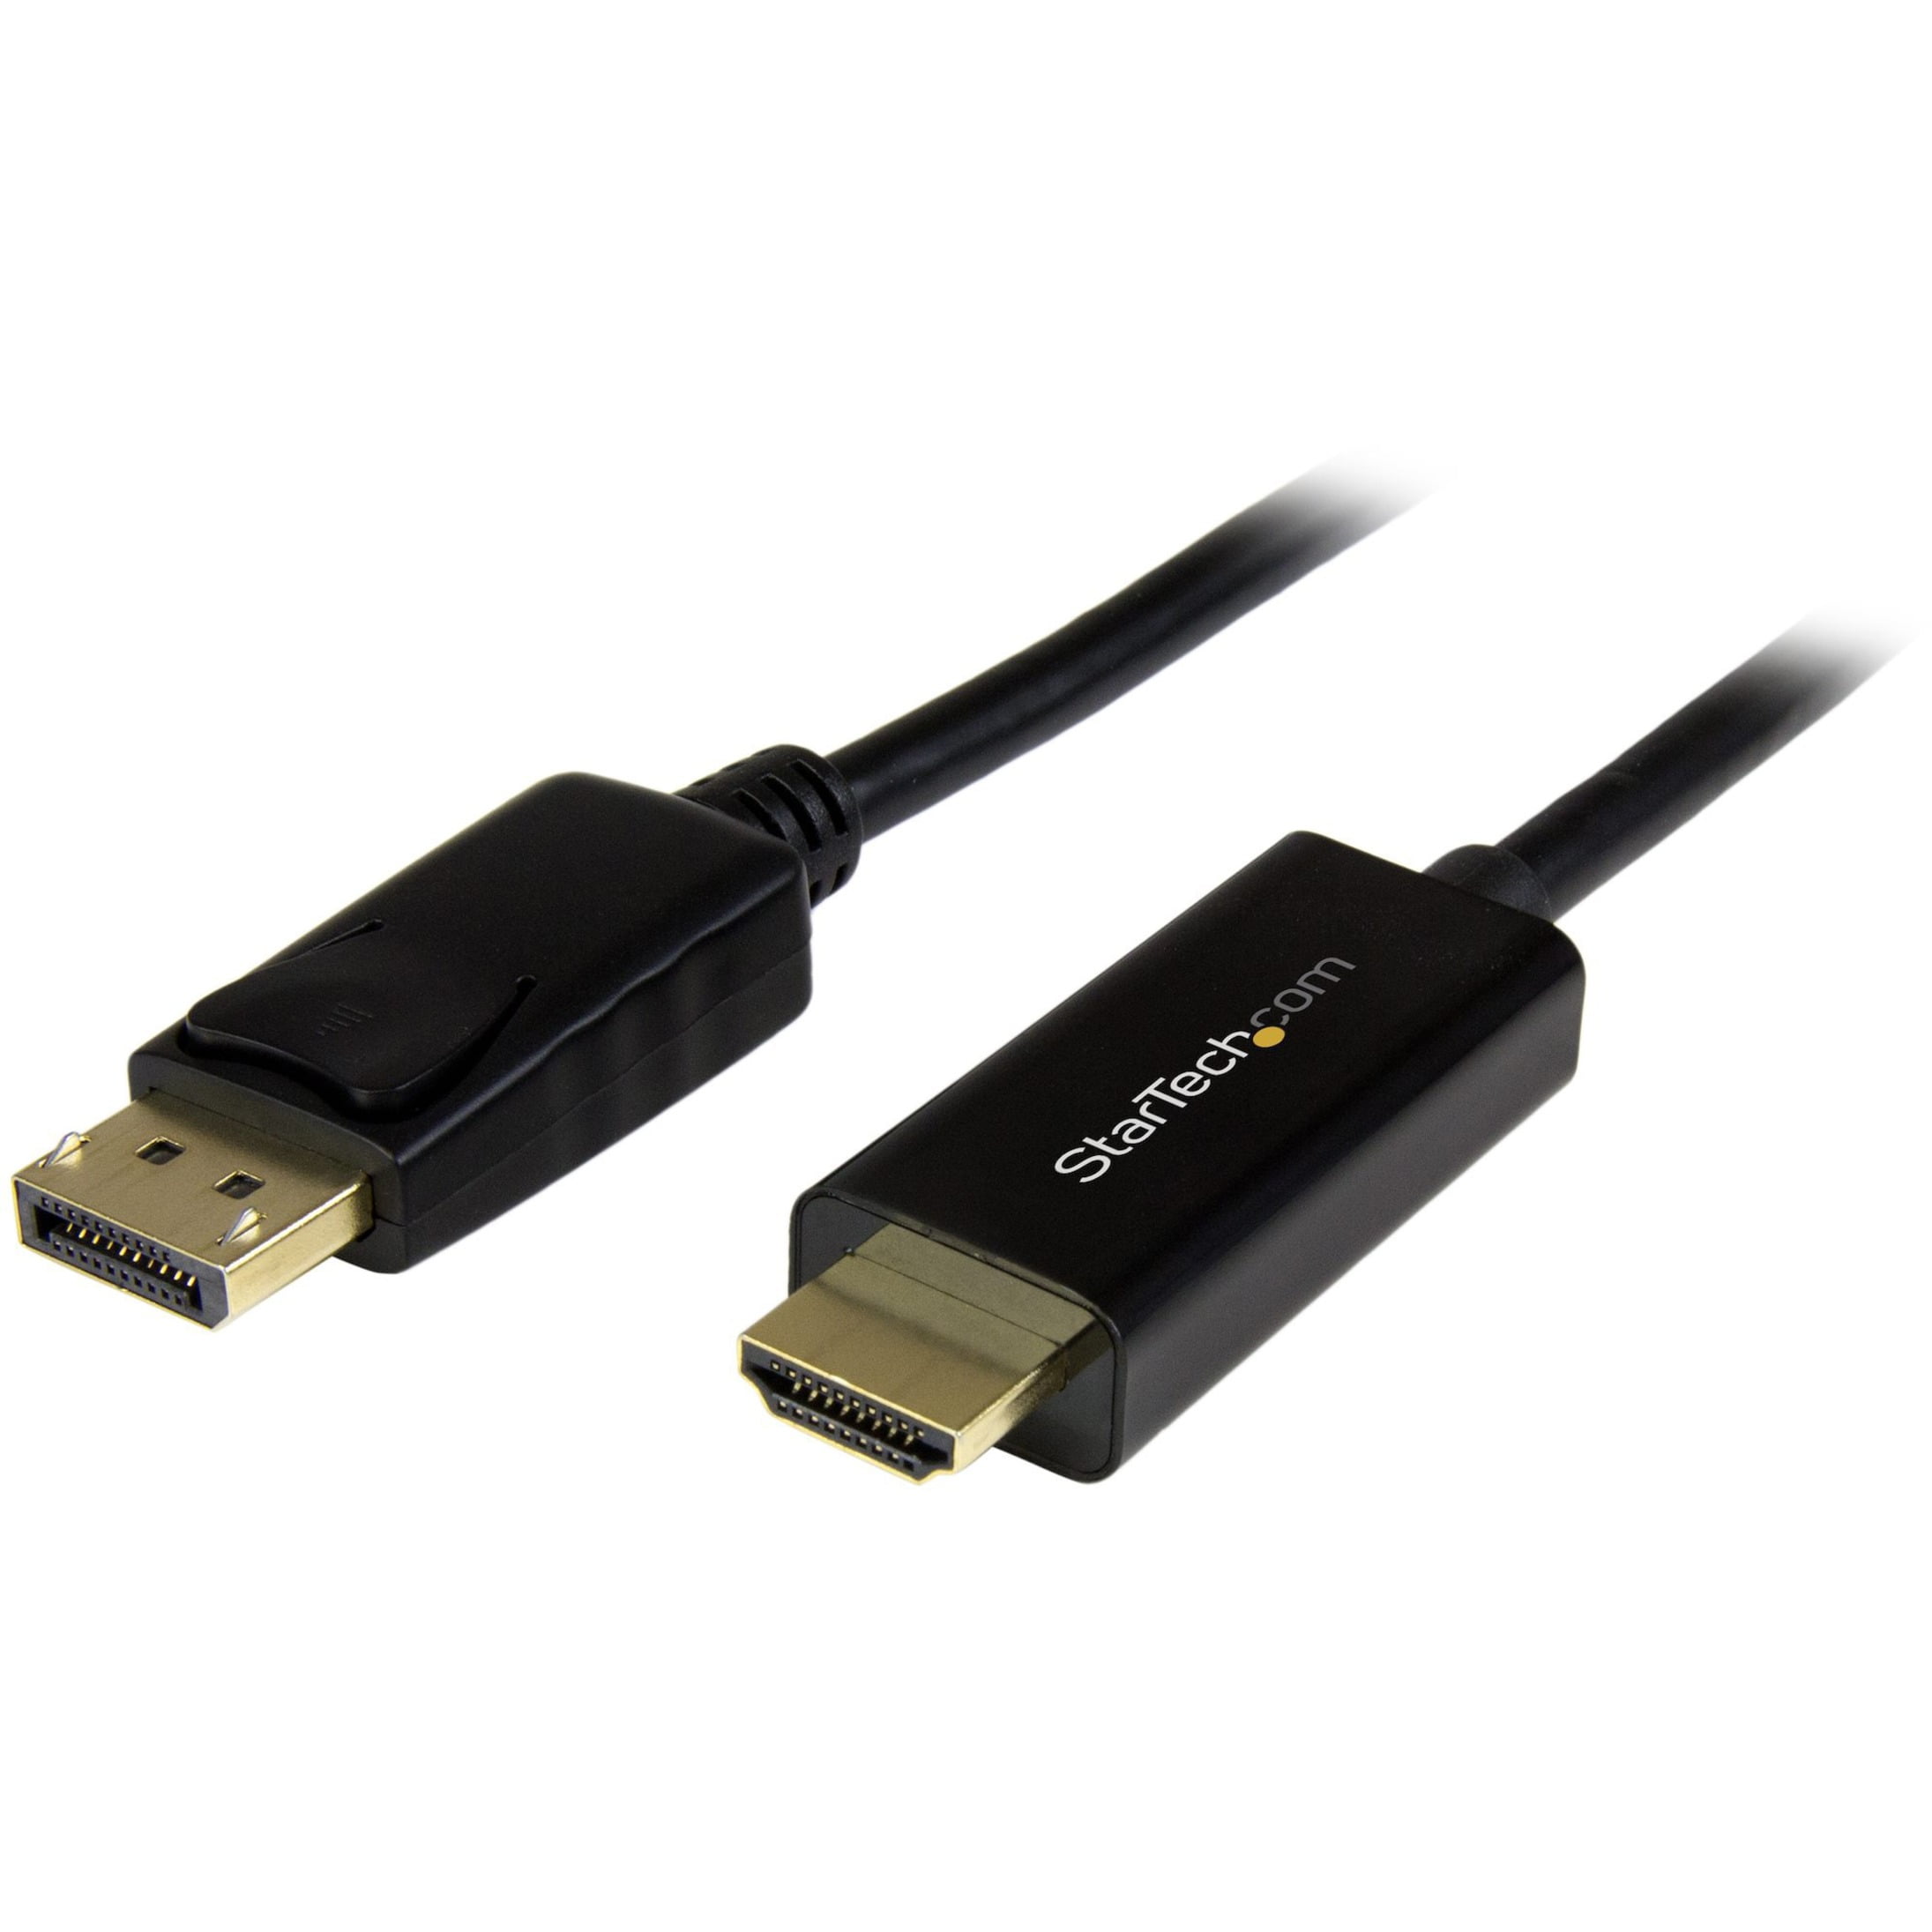 10ft (3m) USB C to HDMI Cable 4K 60Hz w/HDR10 - Ultra HD USB Type-C to 4K  HDMI 2.0b Video Adapter Cable - USB-C to HDMI HDR Monitor/Display Converter